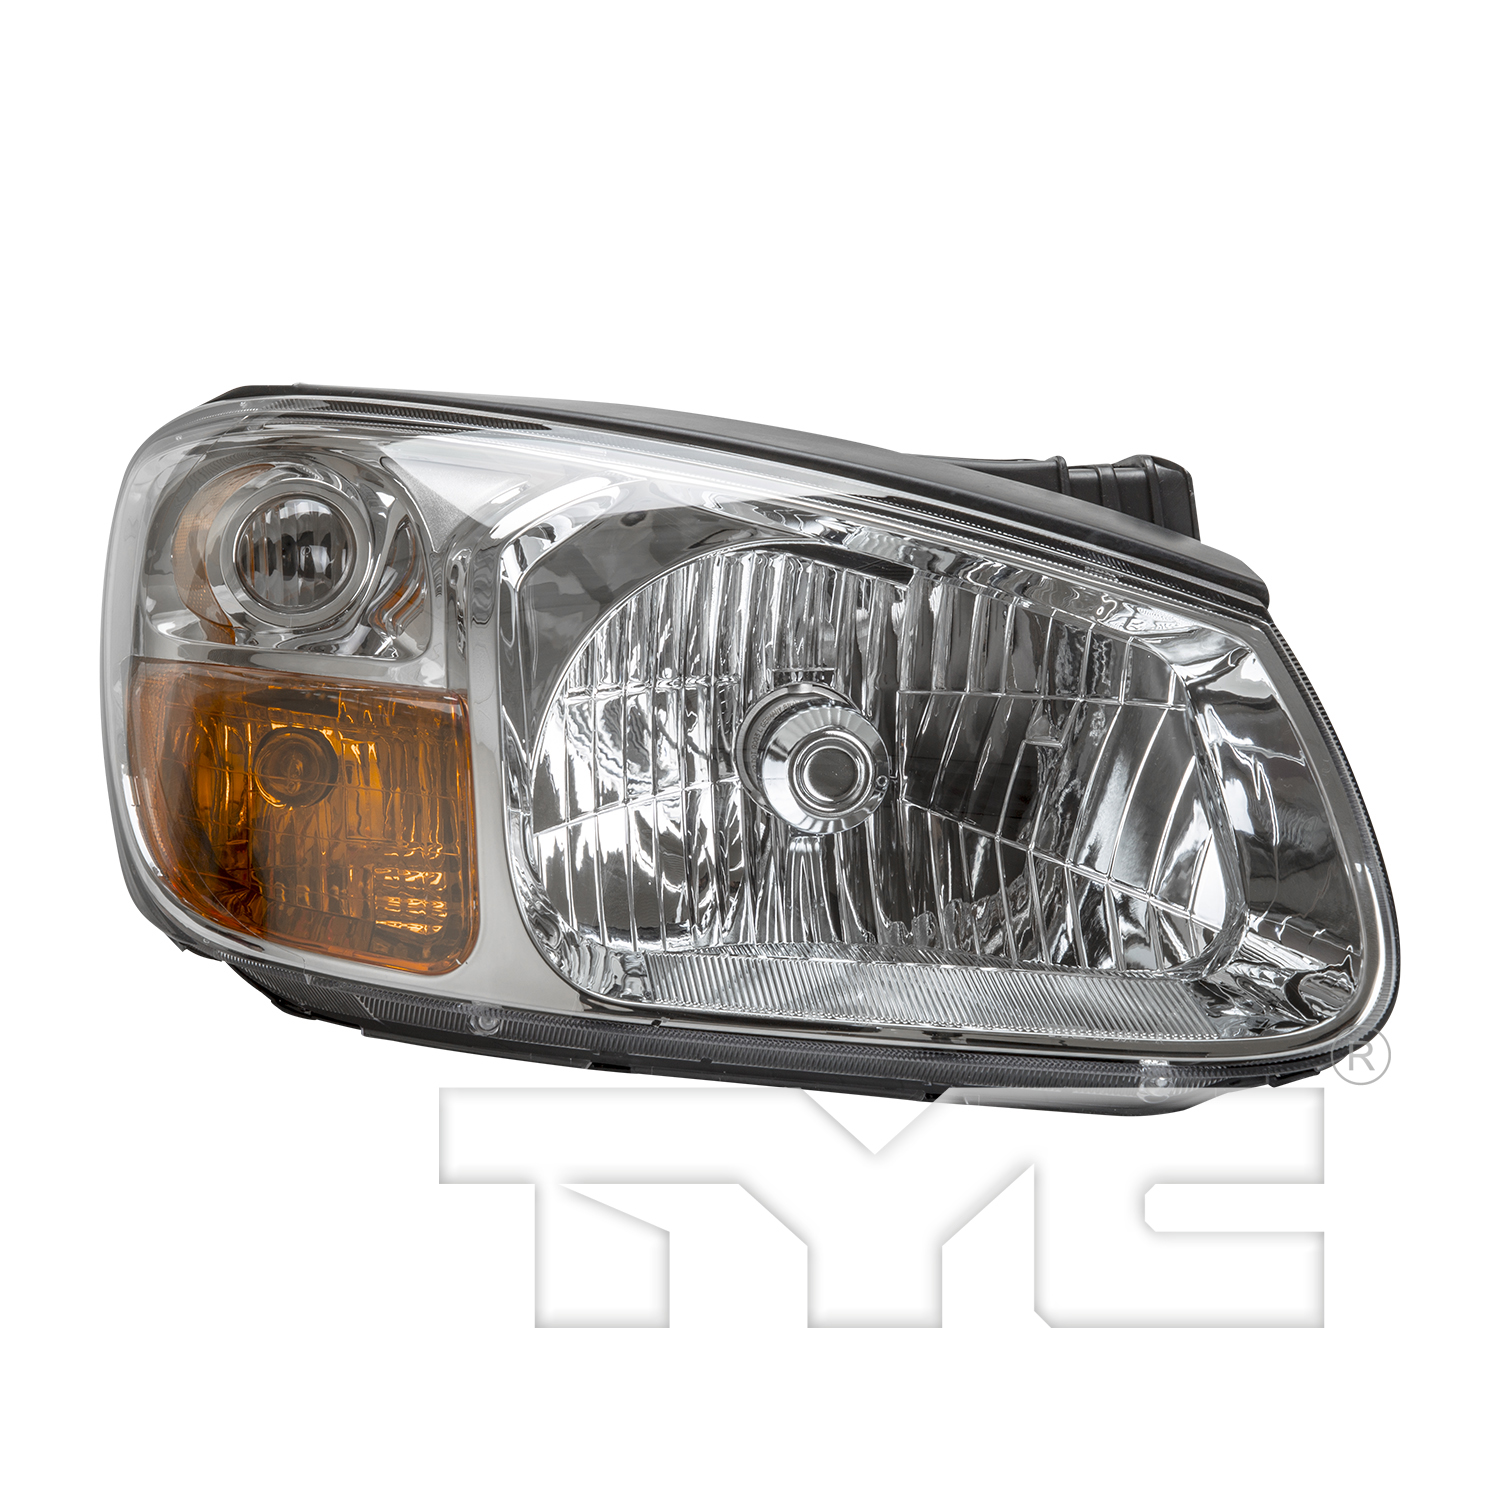 Aftermarket HEADLIGHTS for KIA - SPECTRA, SPECTRA,07-09,RT Headlamp assy composite